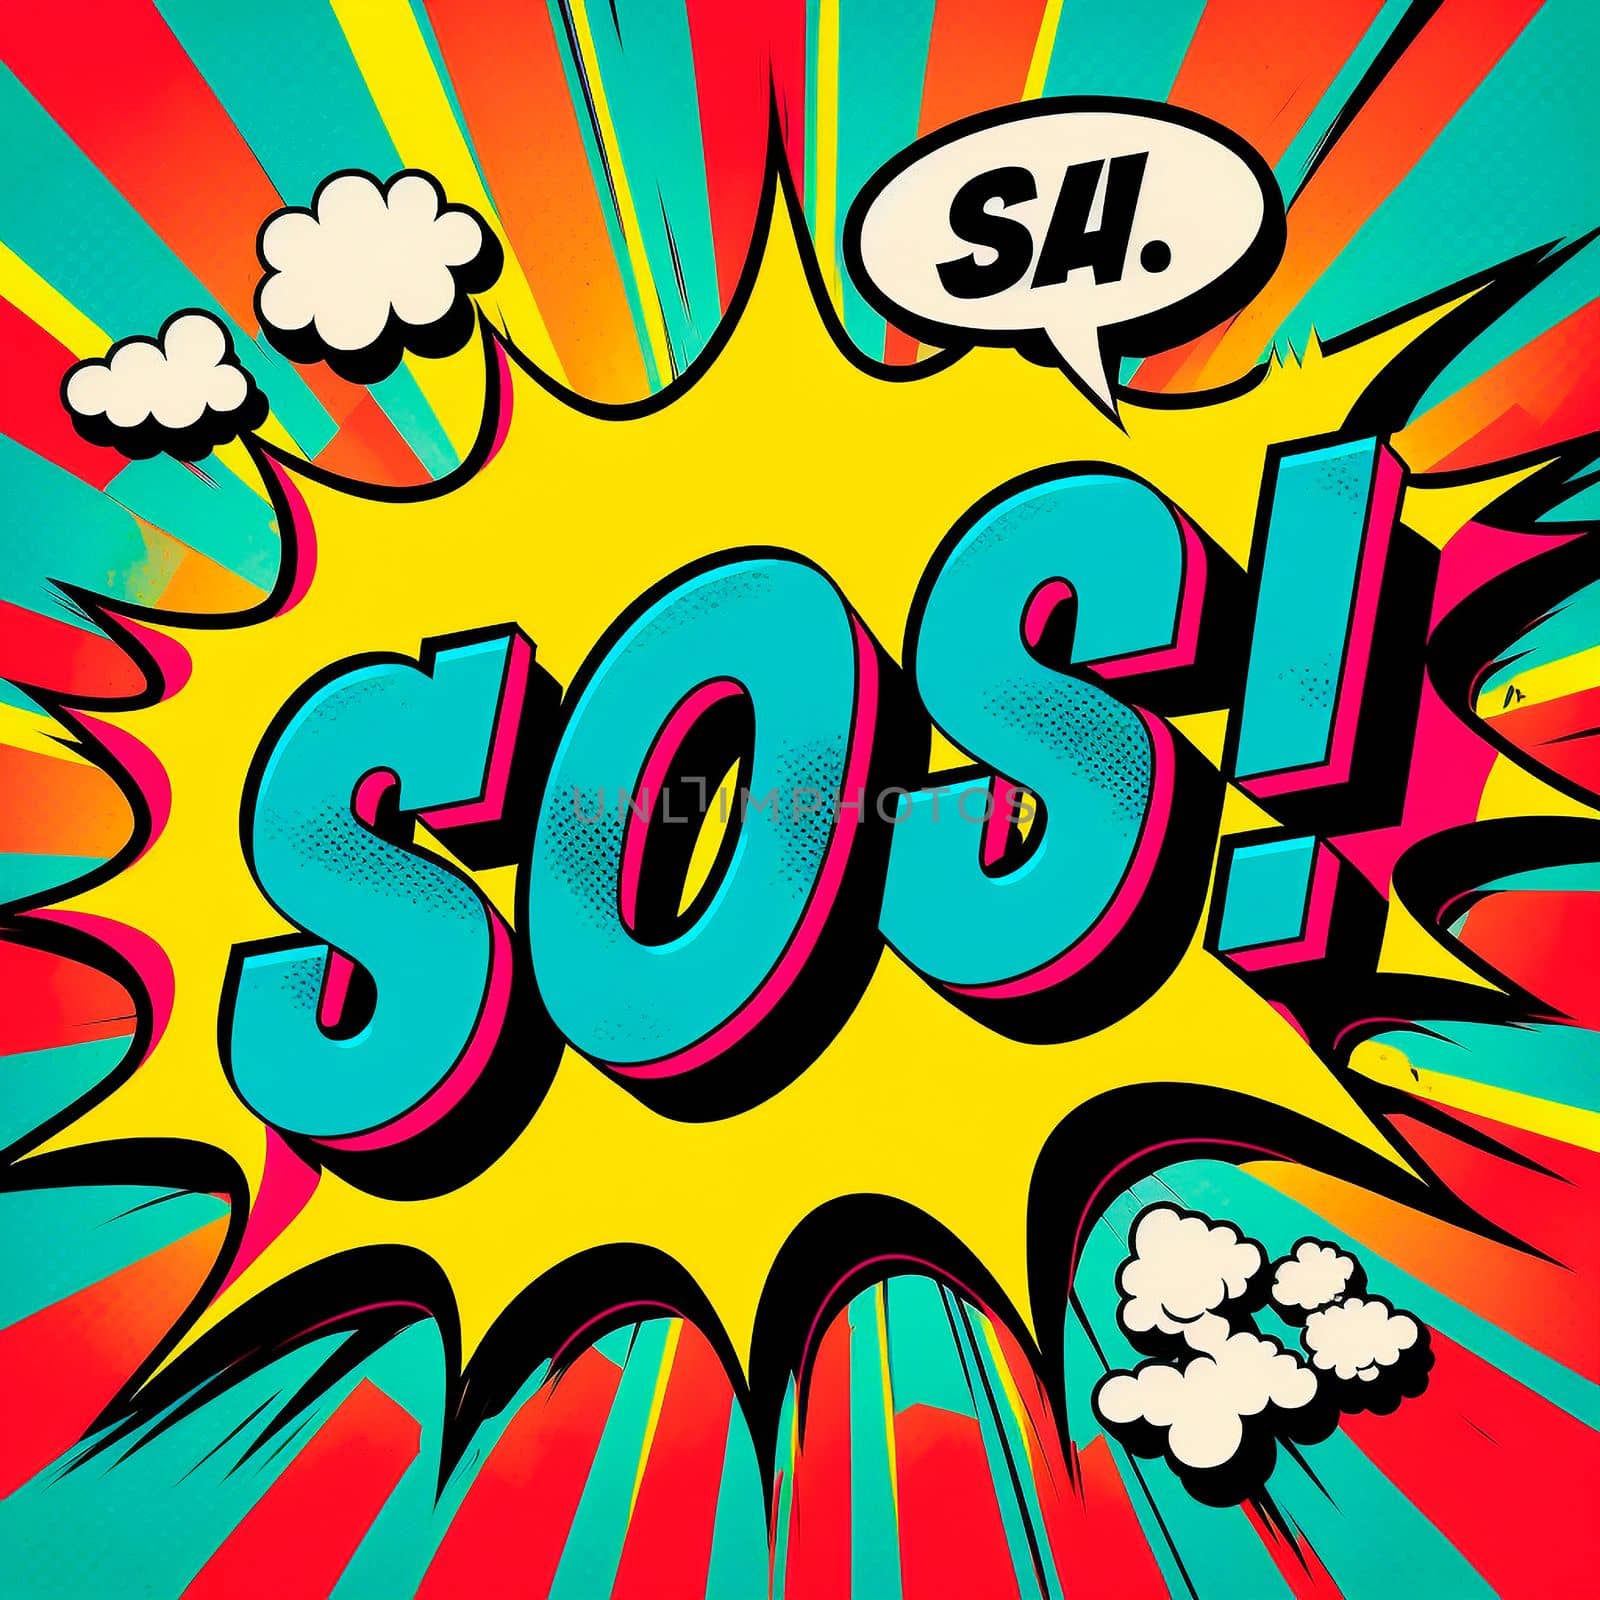 Cartoon sign of burst clouds with the word SOS by NeuroSky